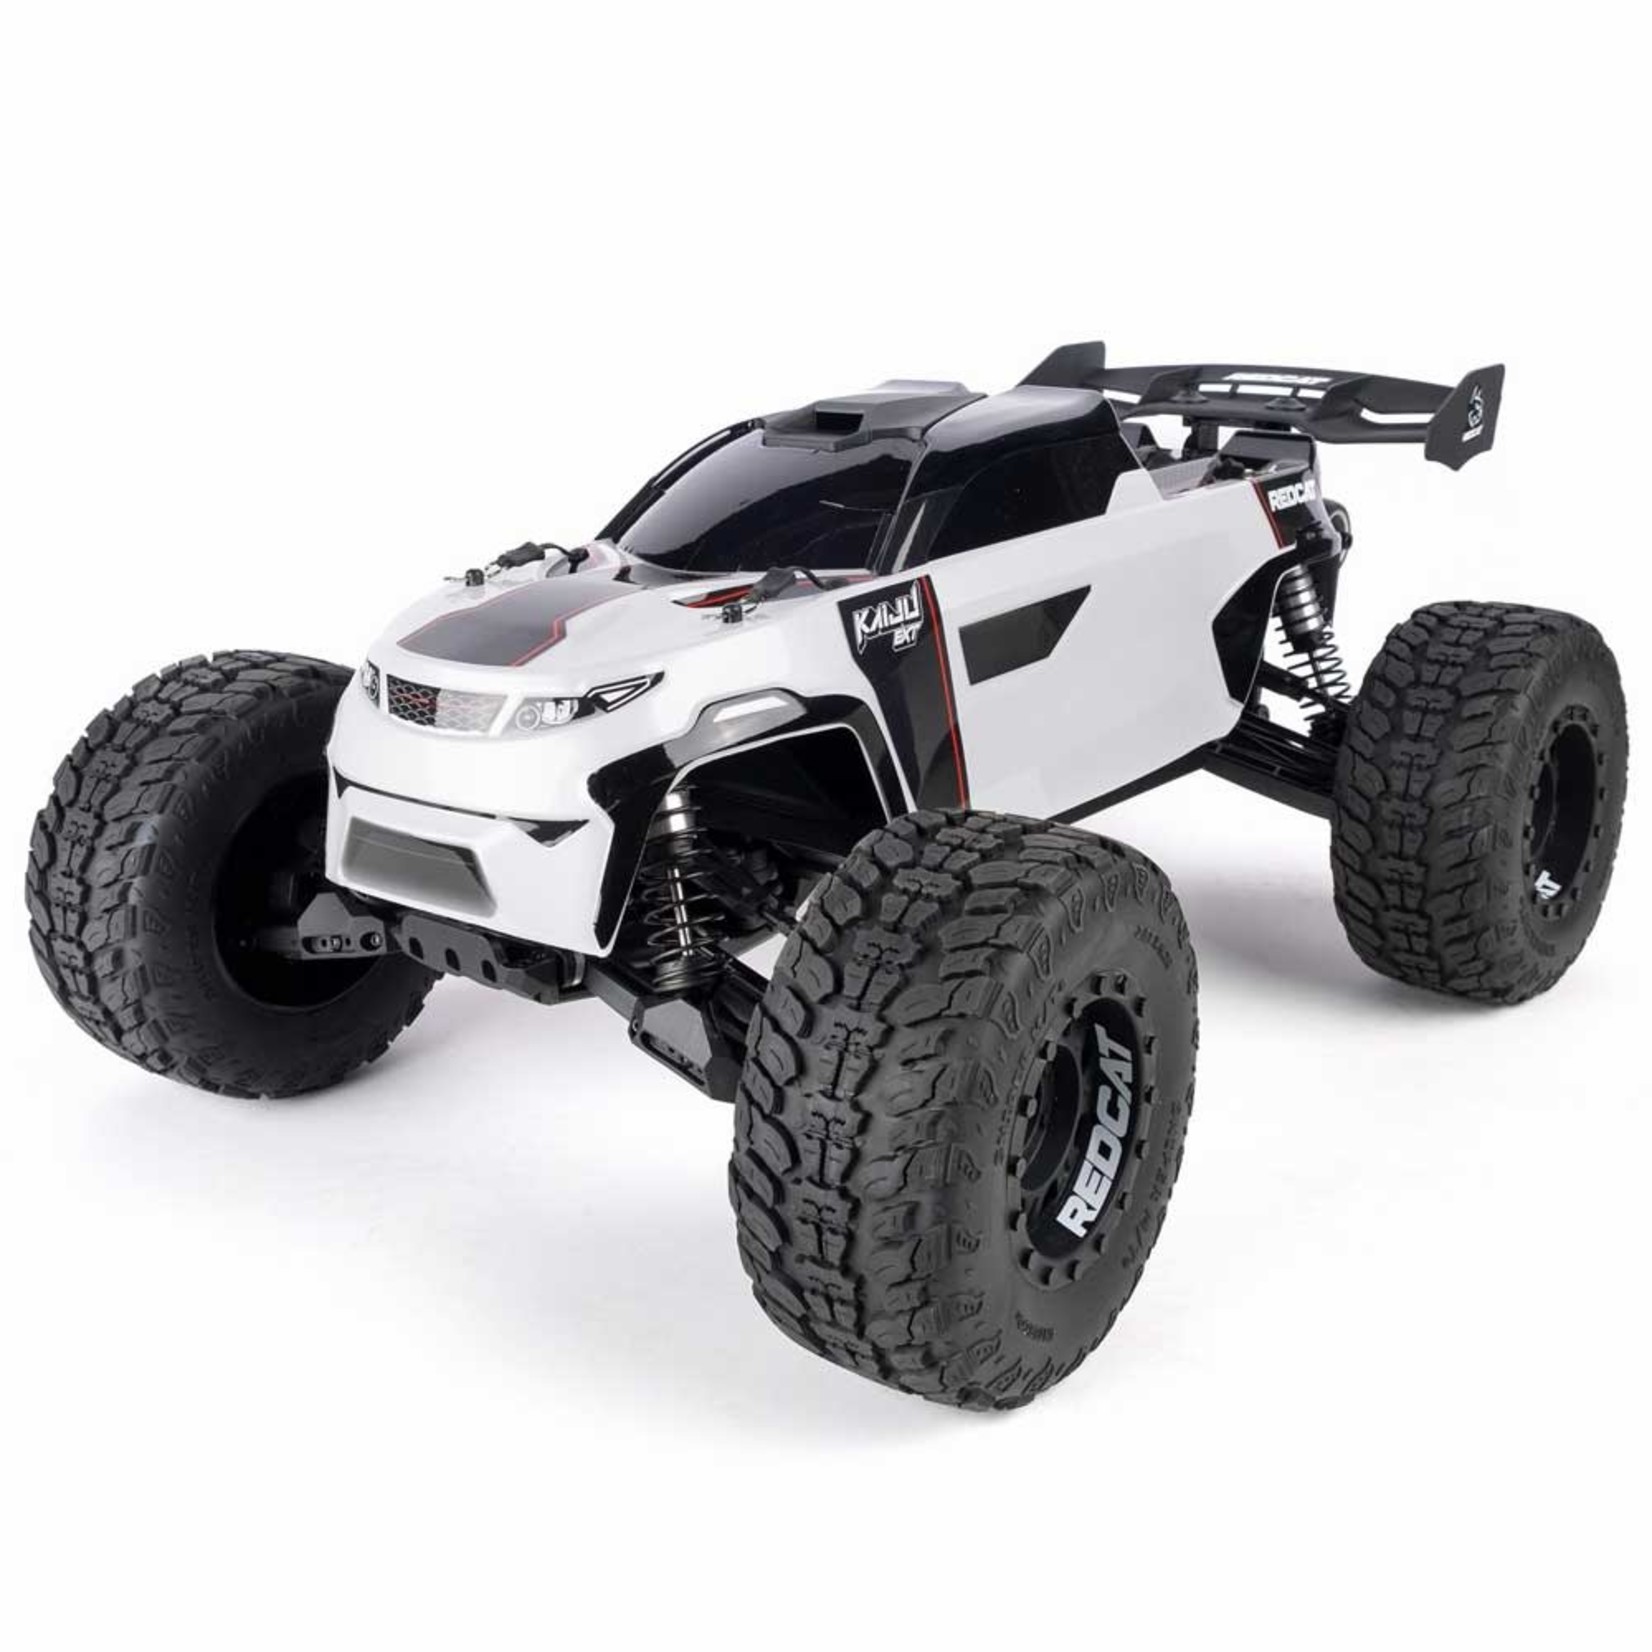 Redcat Racing Redcat KAIJU EXT 1/8 Scale 6S Ready Monster Truck #RER14420